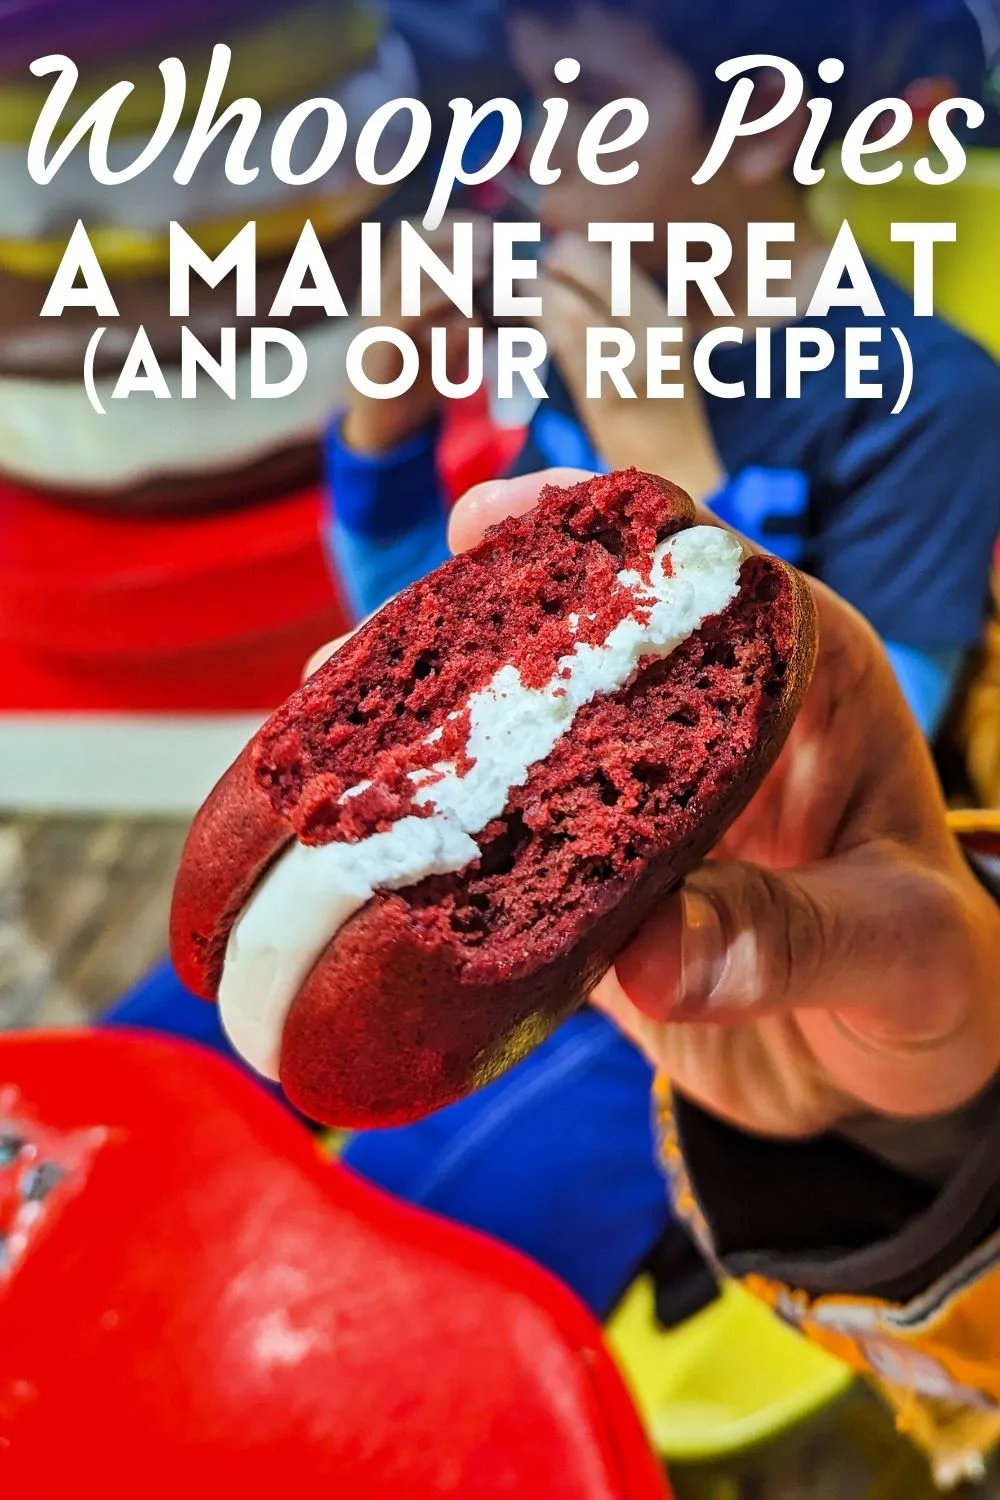 https://2traveldads.com/wp-content/uploads/Whoopie-Pies-in-Maine-and-a-great-recipe-1.jpg.webp